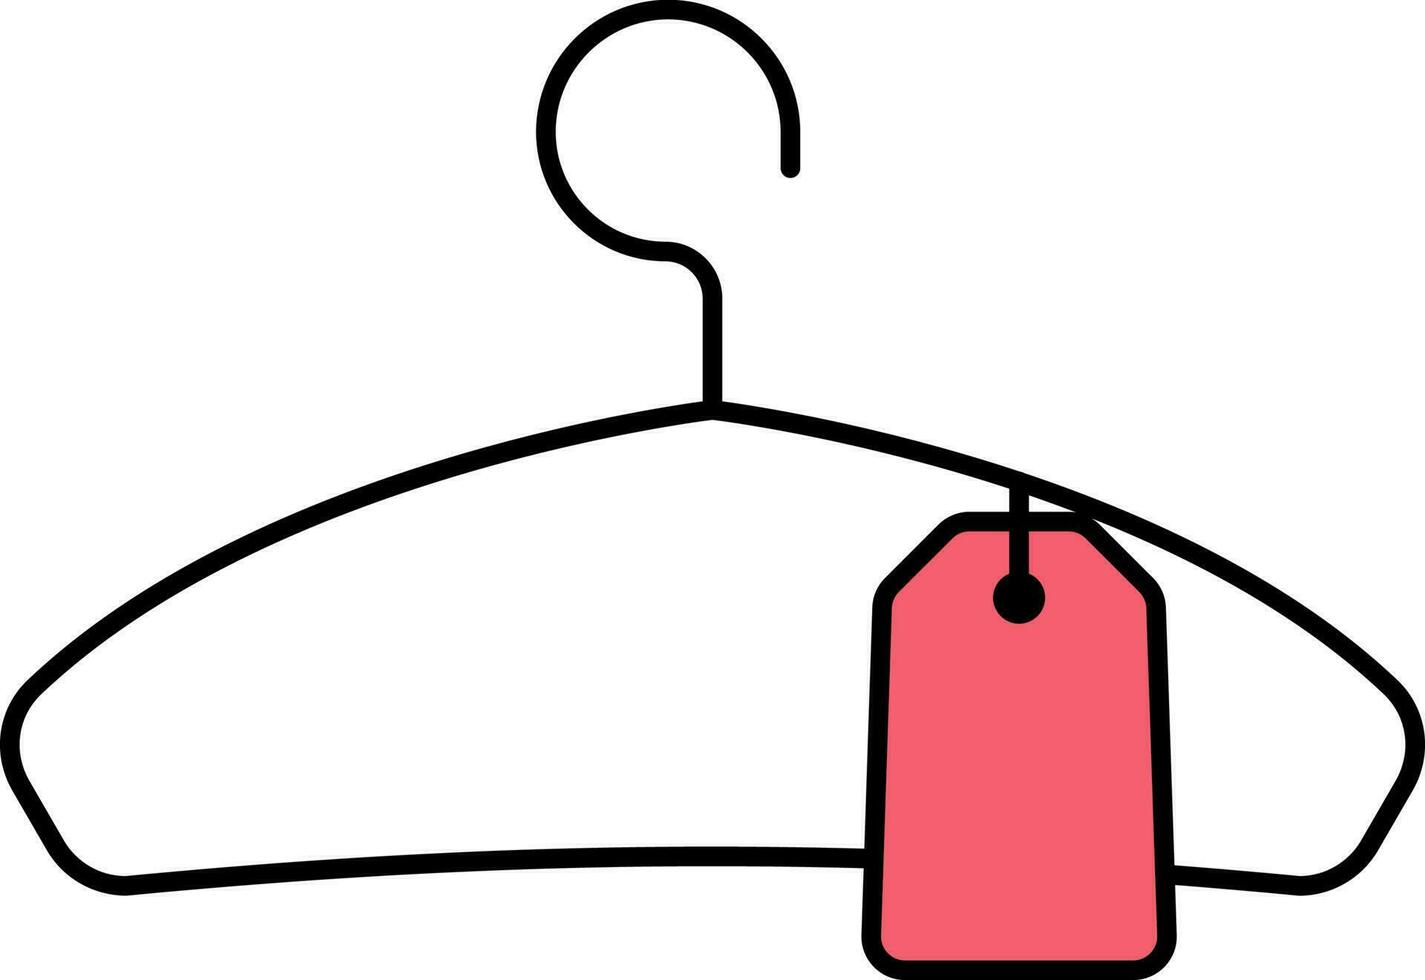 Cloth Hanger With Label Icon In Red And Black Color. vector